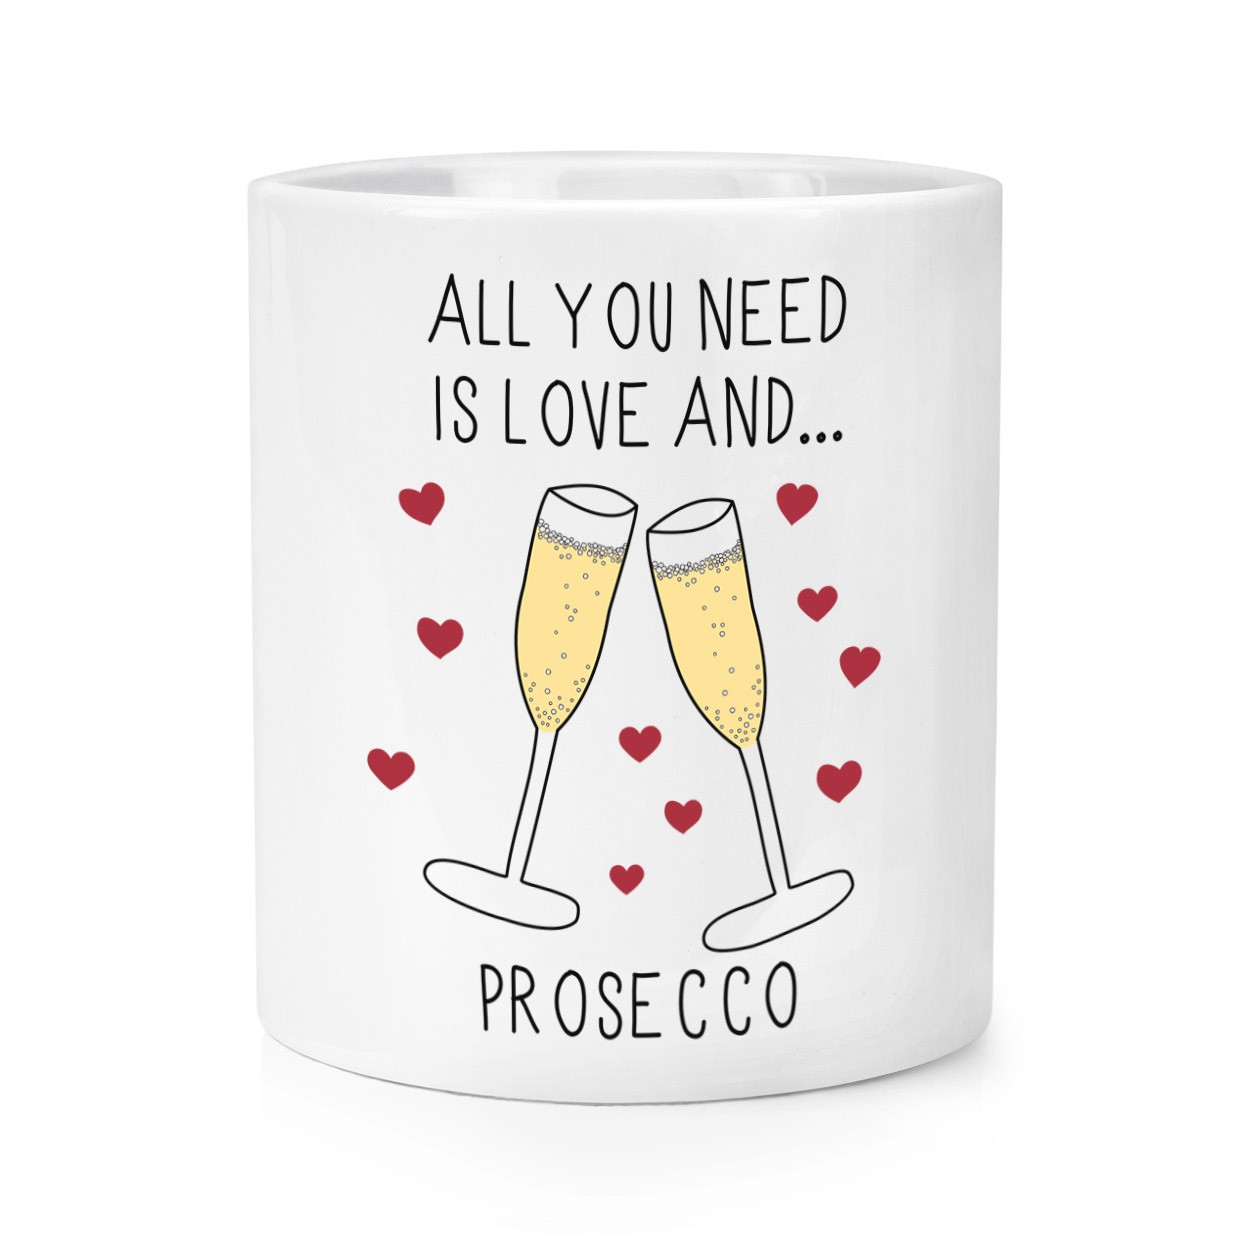 All You Need Is Love And Prosecco Makeup Brush Pencil Pot